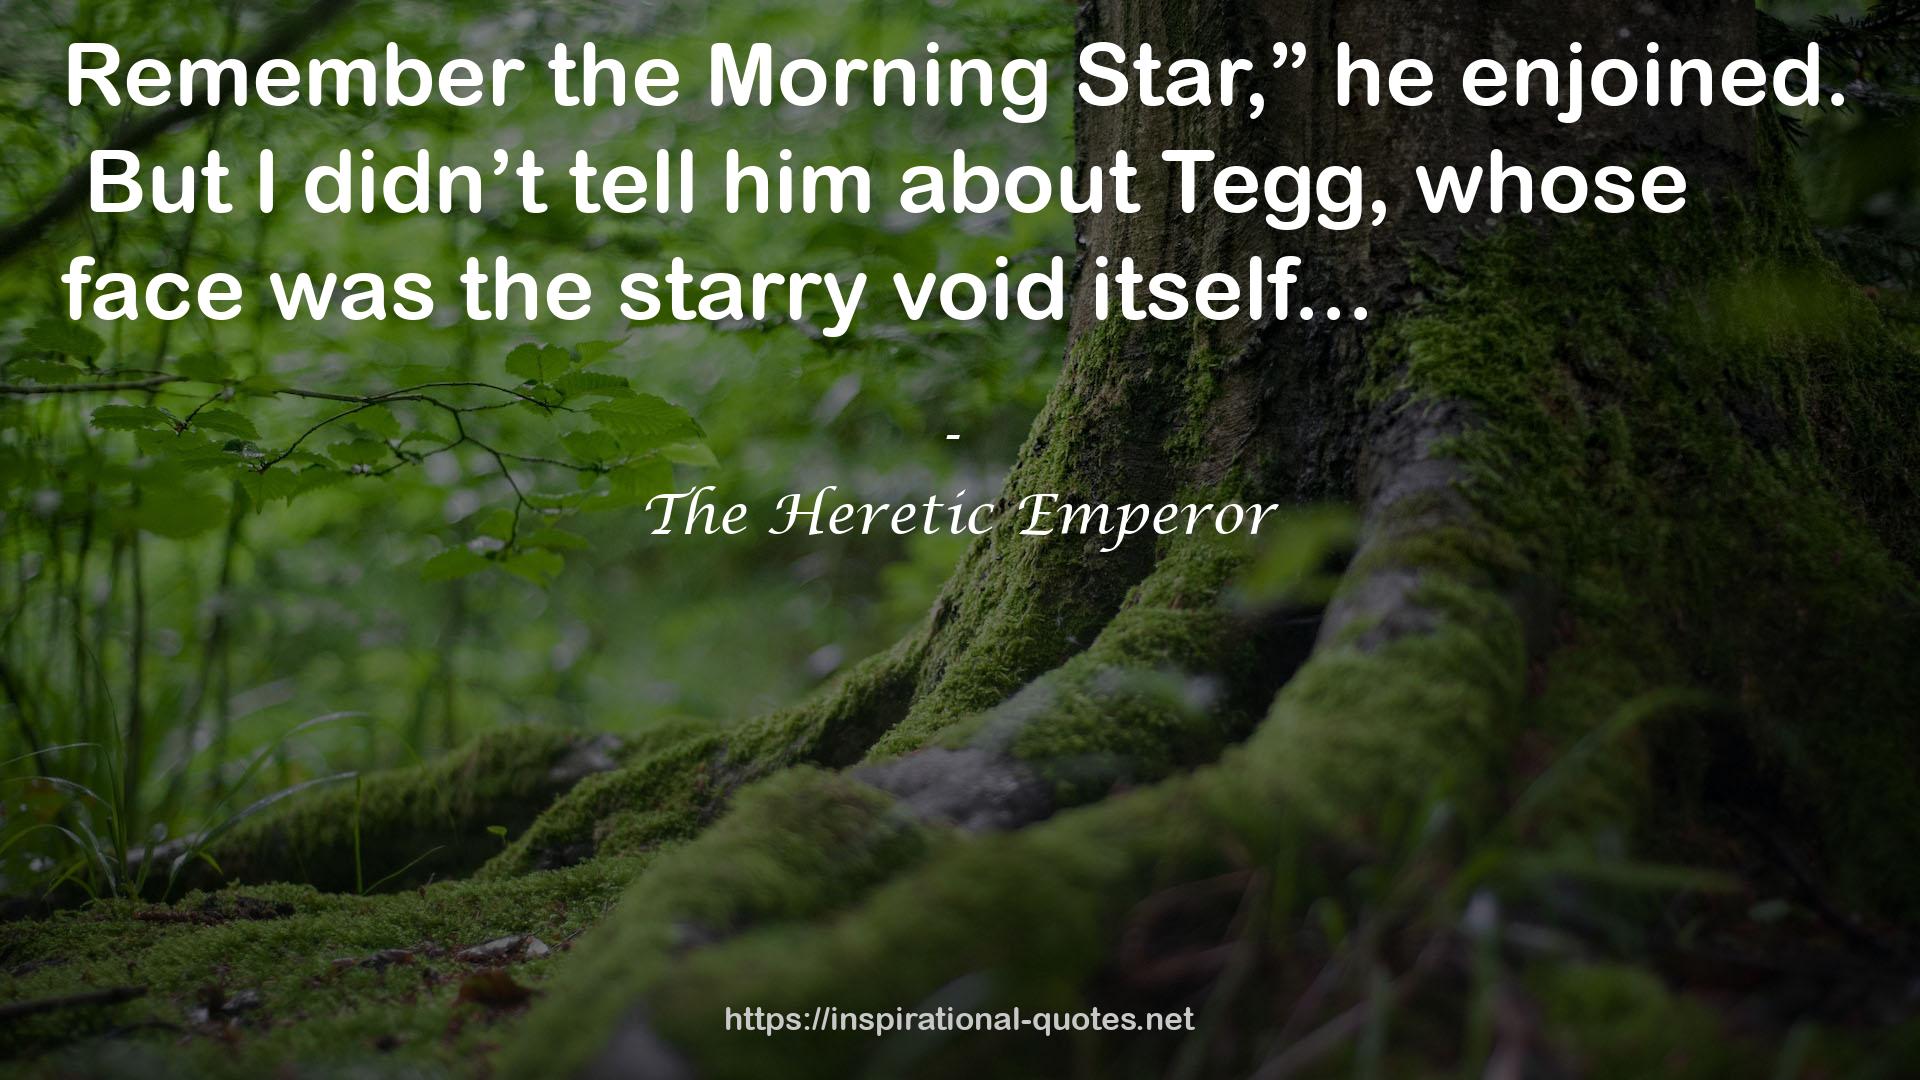 The Heretic Emperor QUOTES